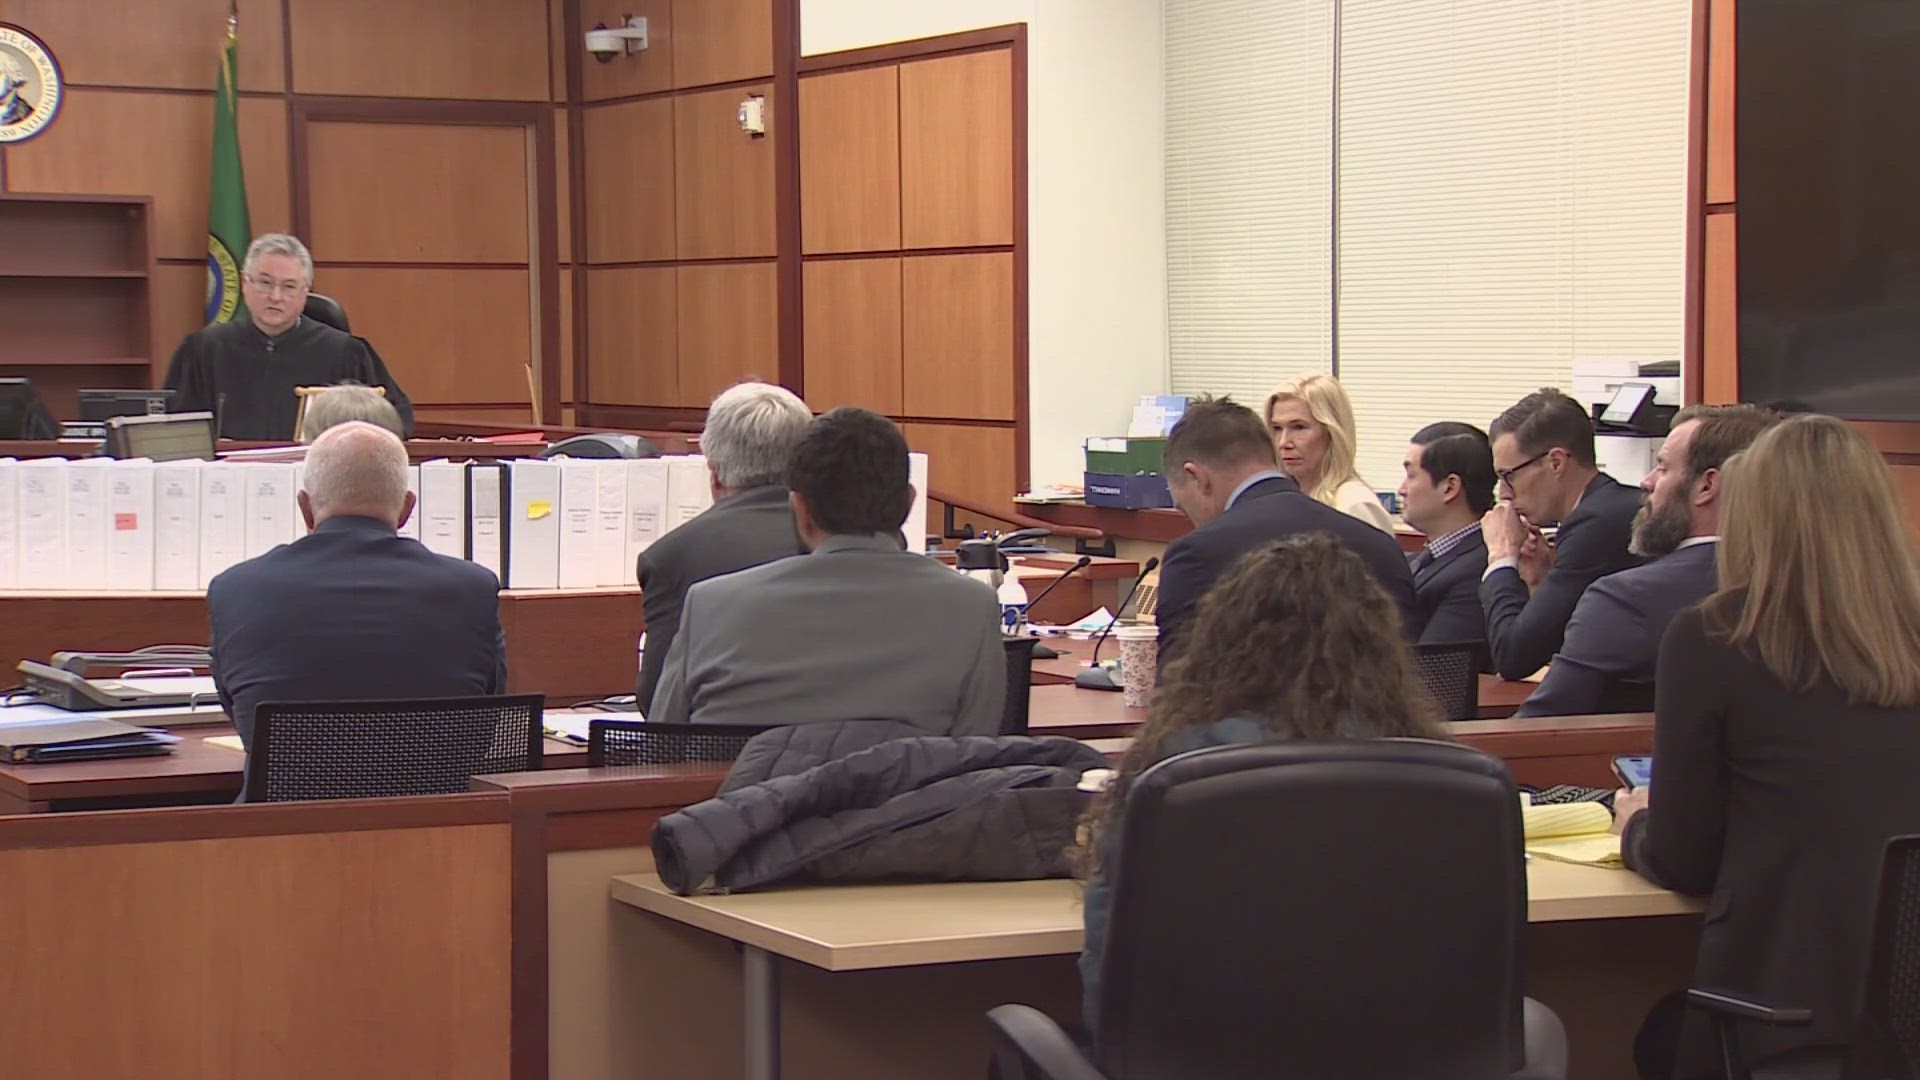 A juror who is caring for a sick family member will now serve as a second alternate in case another juror is excused.